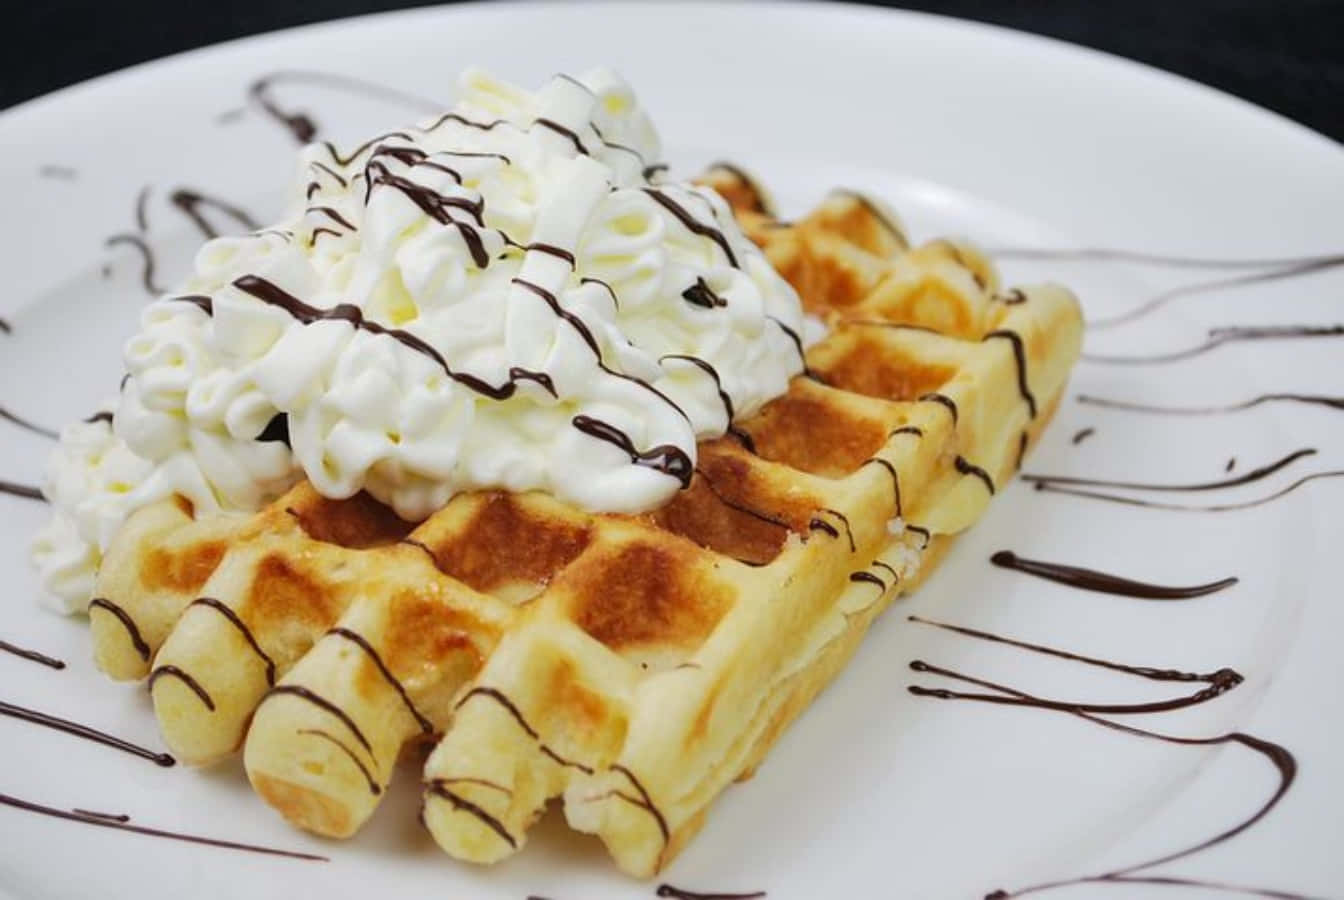 "Enjoy a delicious Belgian Waffle with your favorite toppings!"